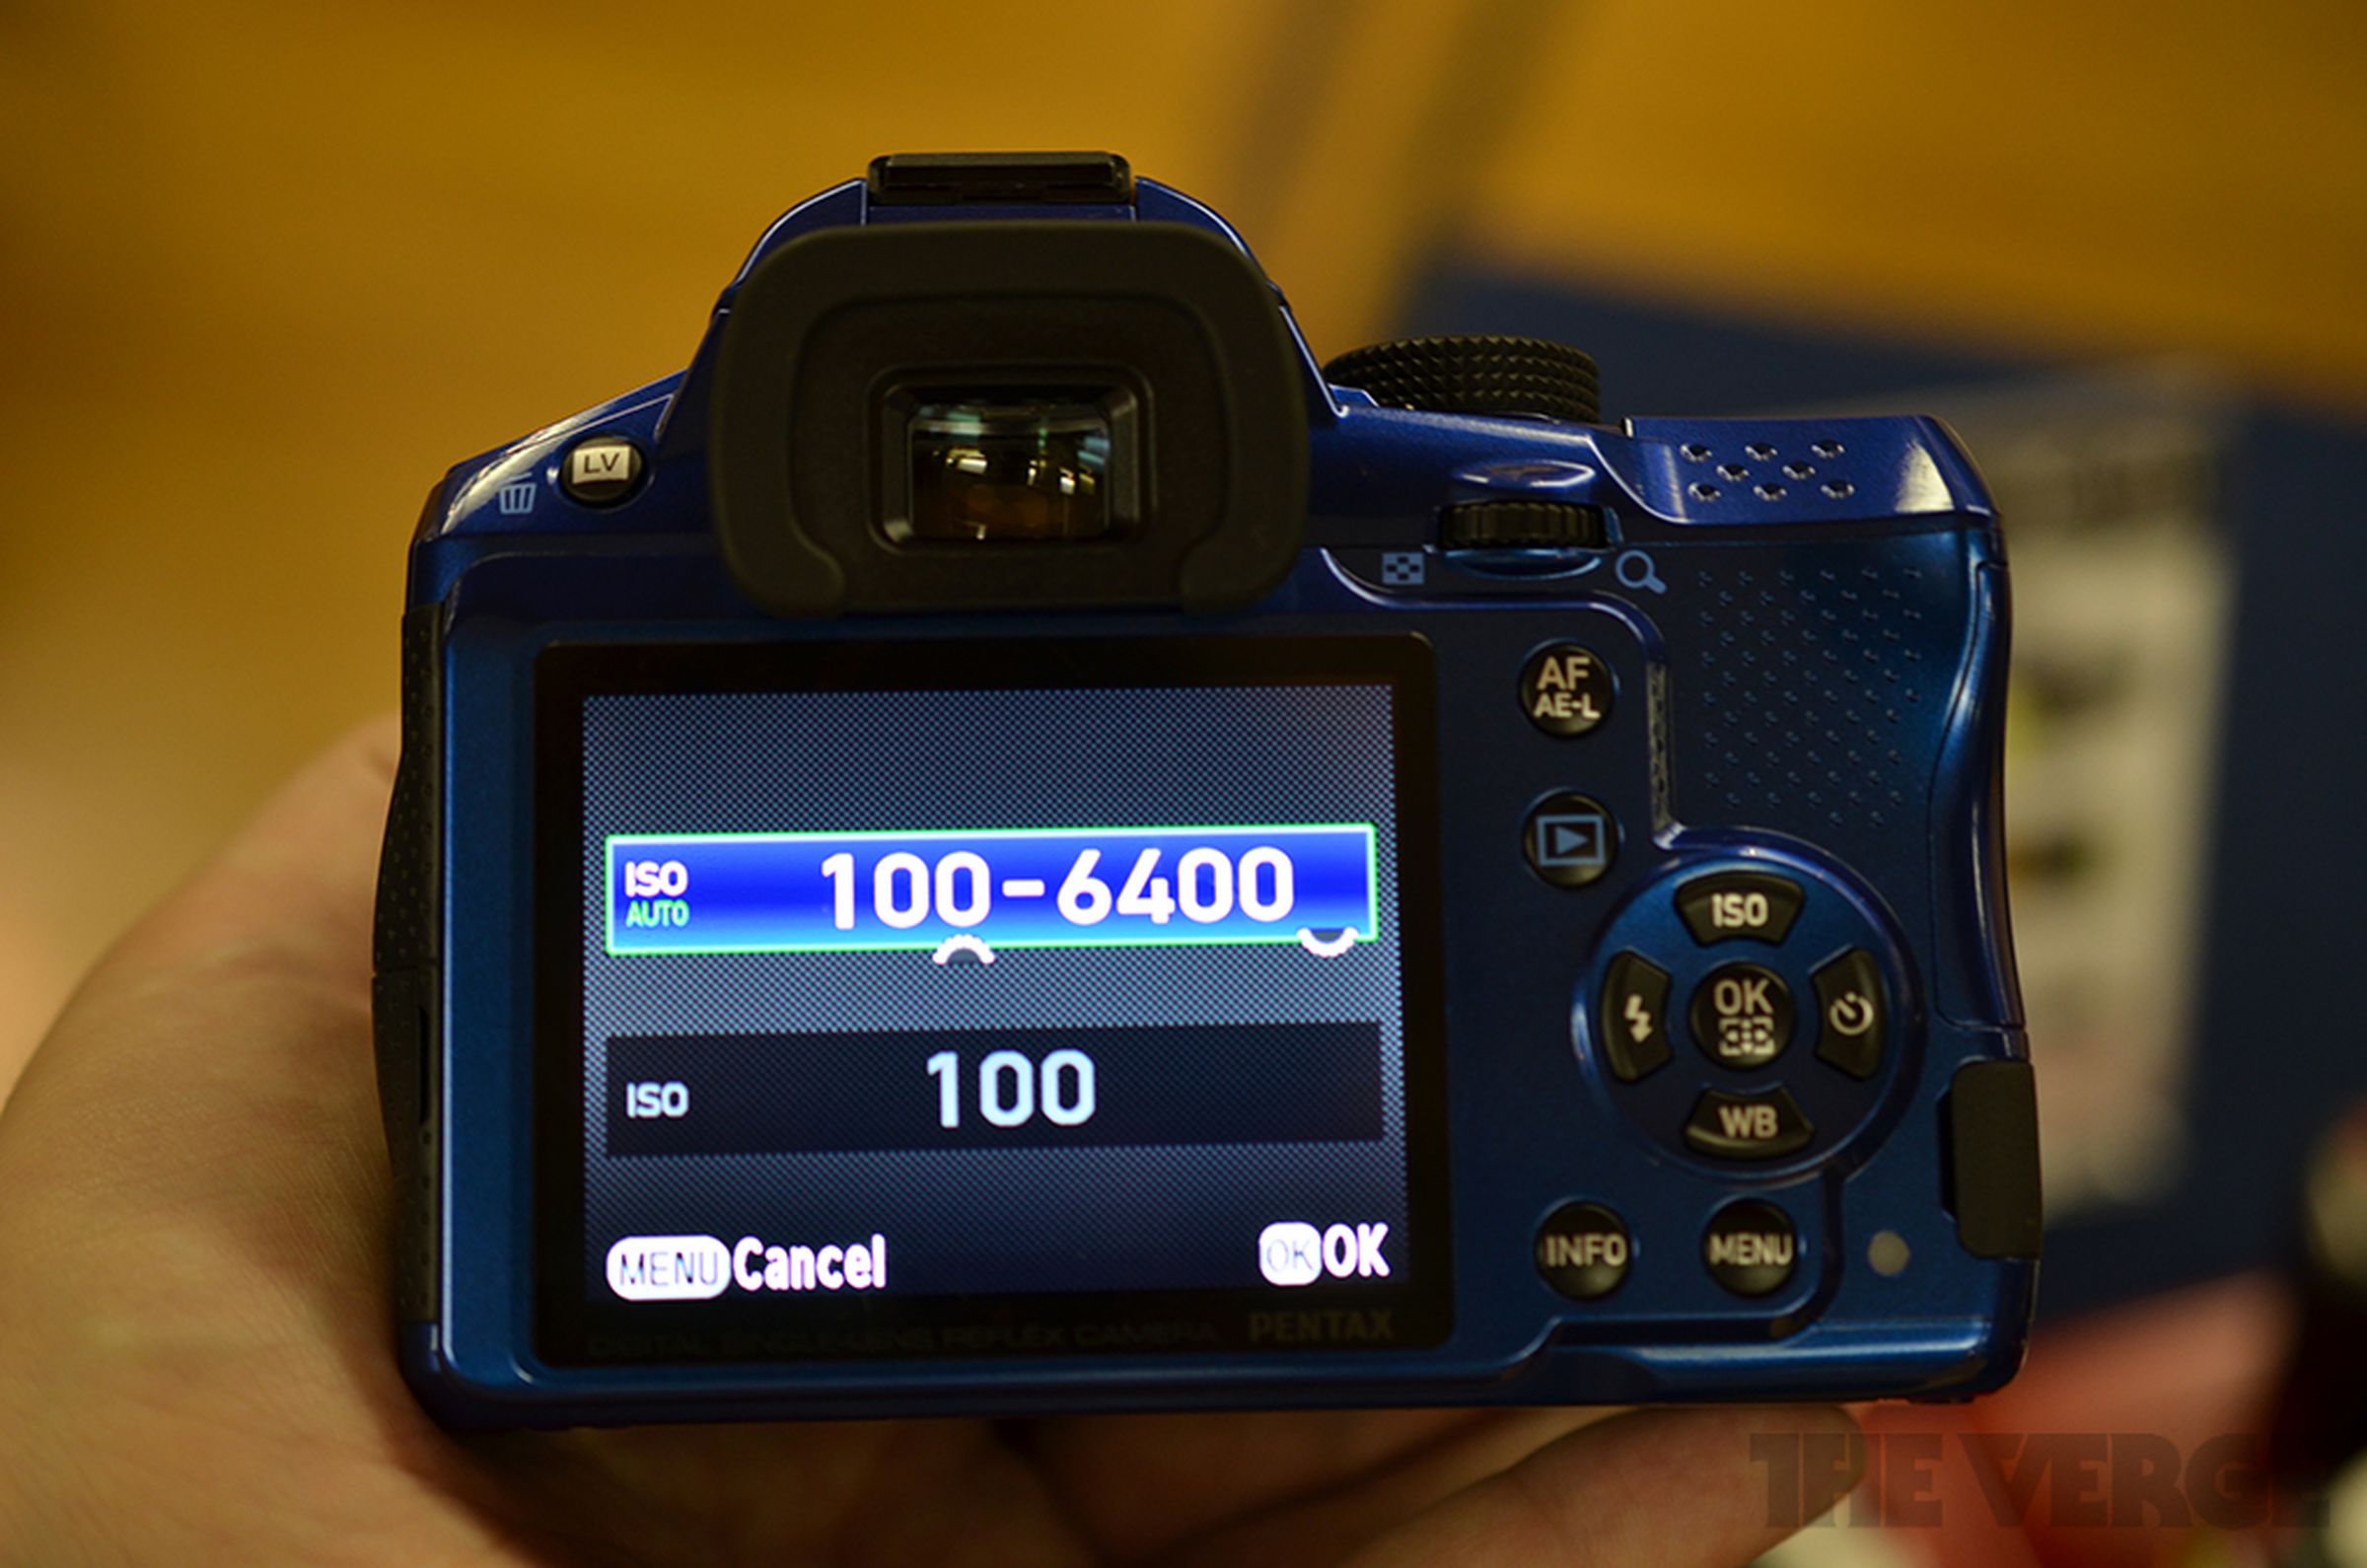 Pentax K-30 hands-on pictures